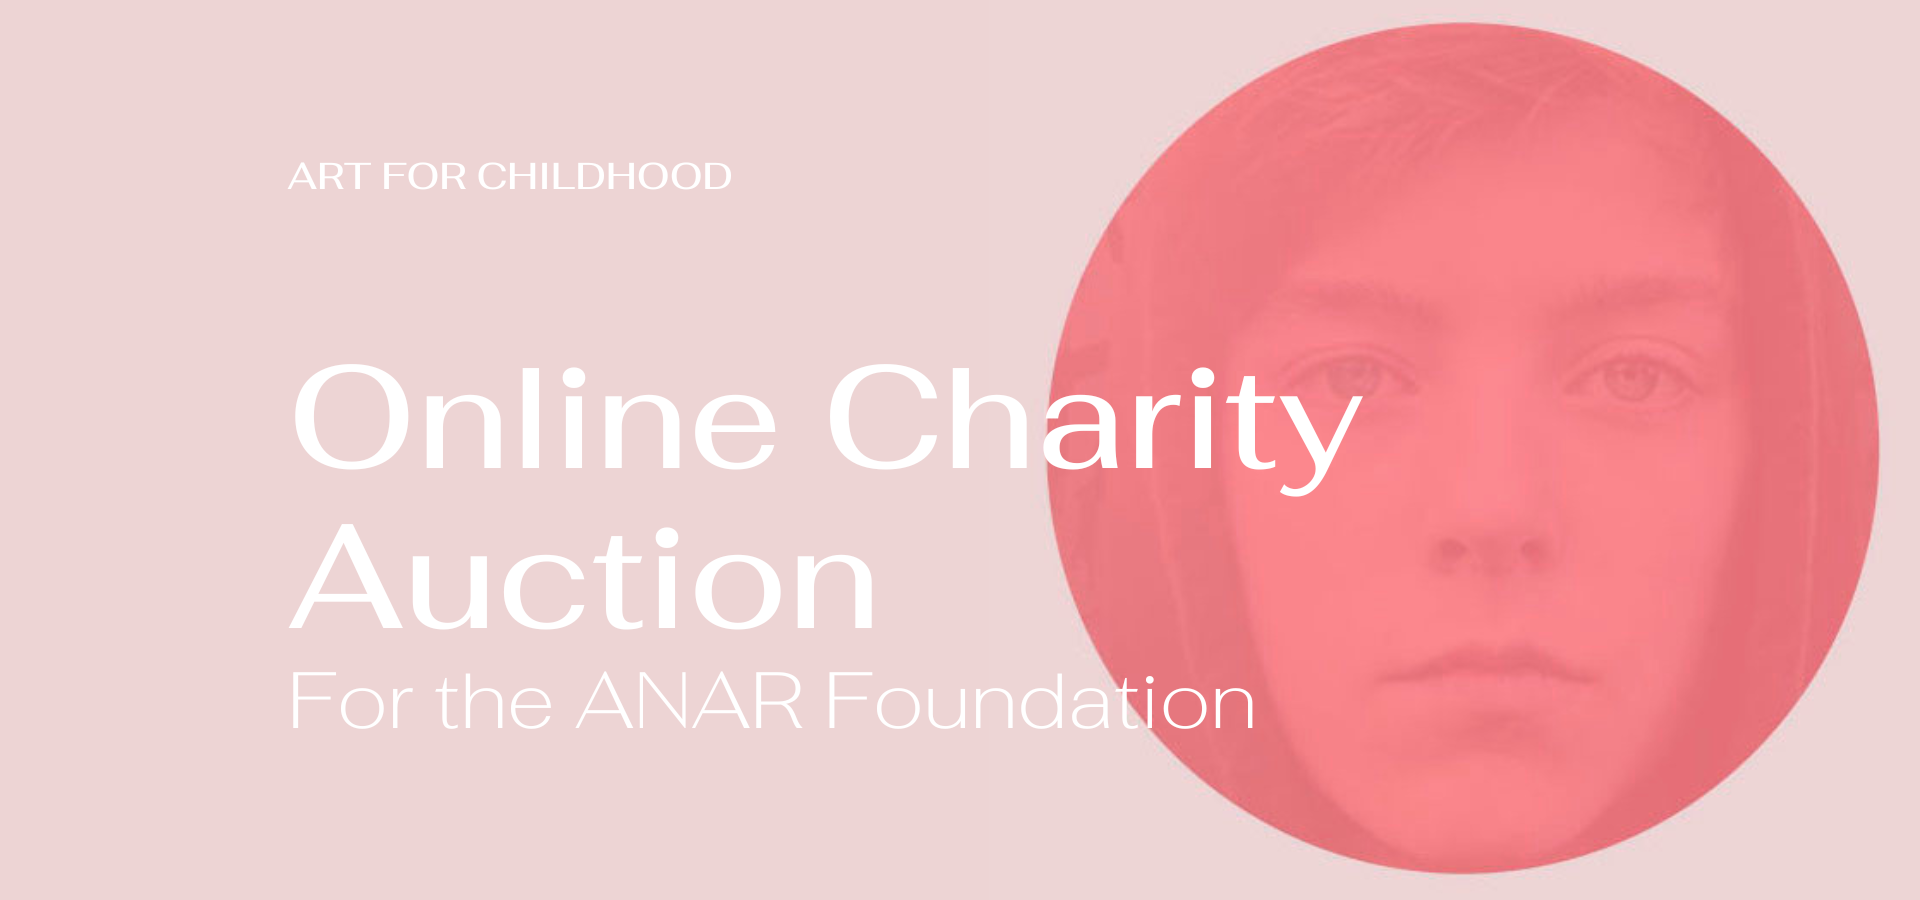 Art for Children - Charity Auction for the benefit of the ANAR Foundation